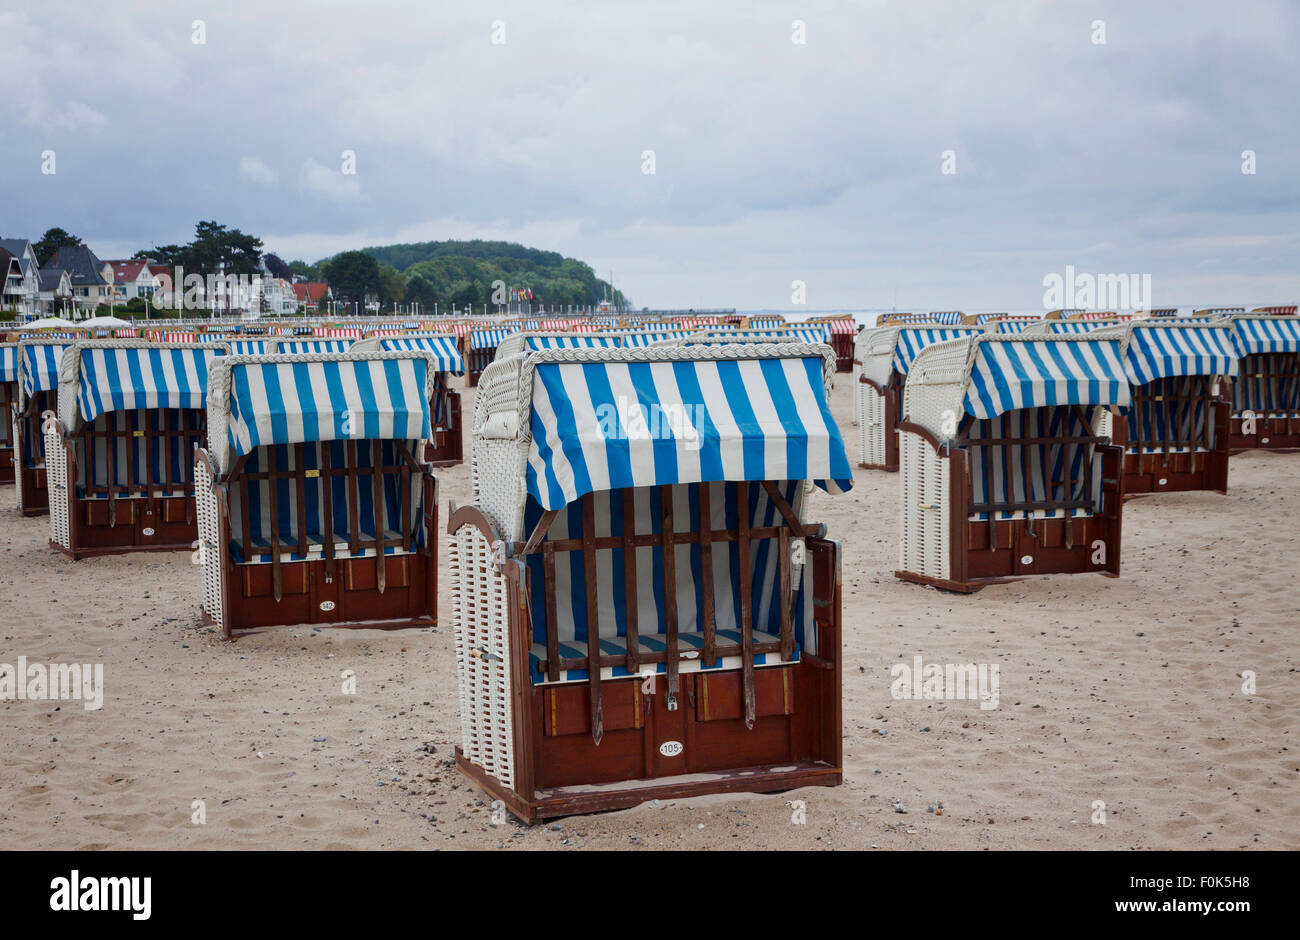 Hooded beach chairs (strandkorb) at the Baltic seacoast in Travemunde, Germany Stock Photo